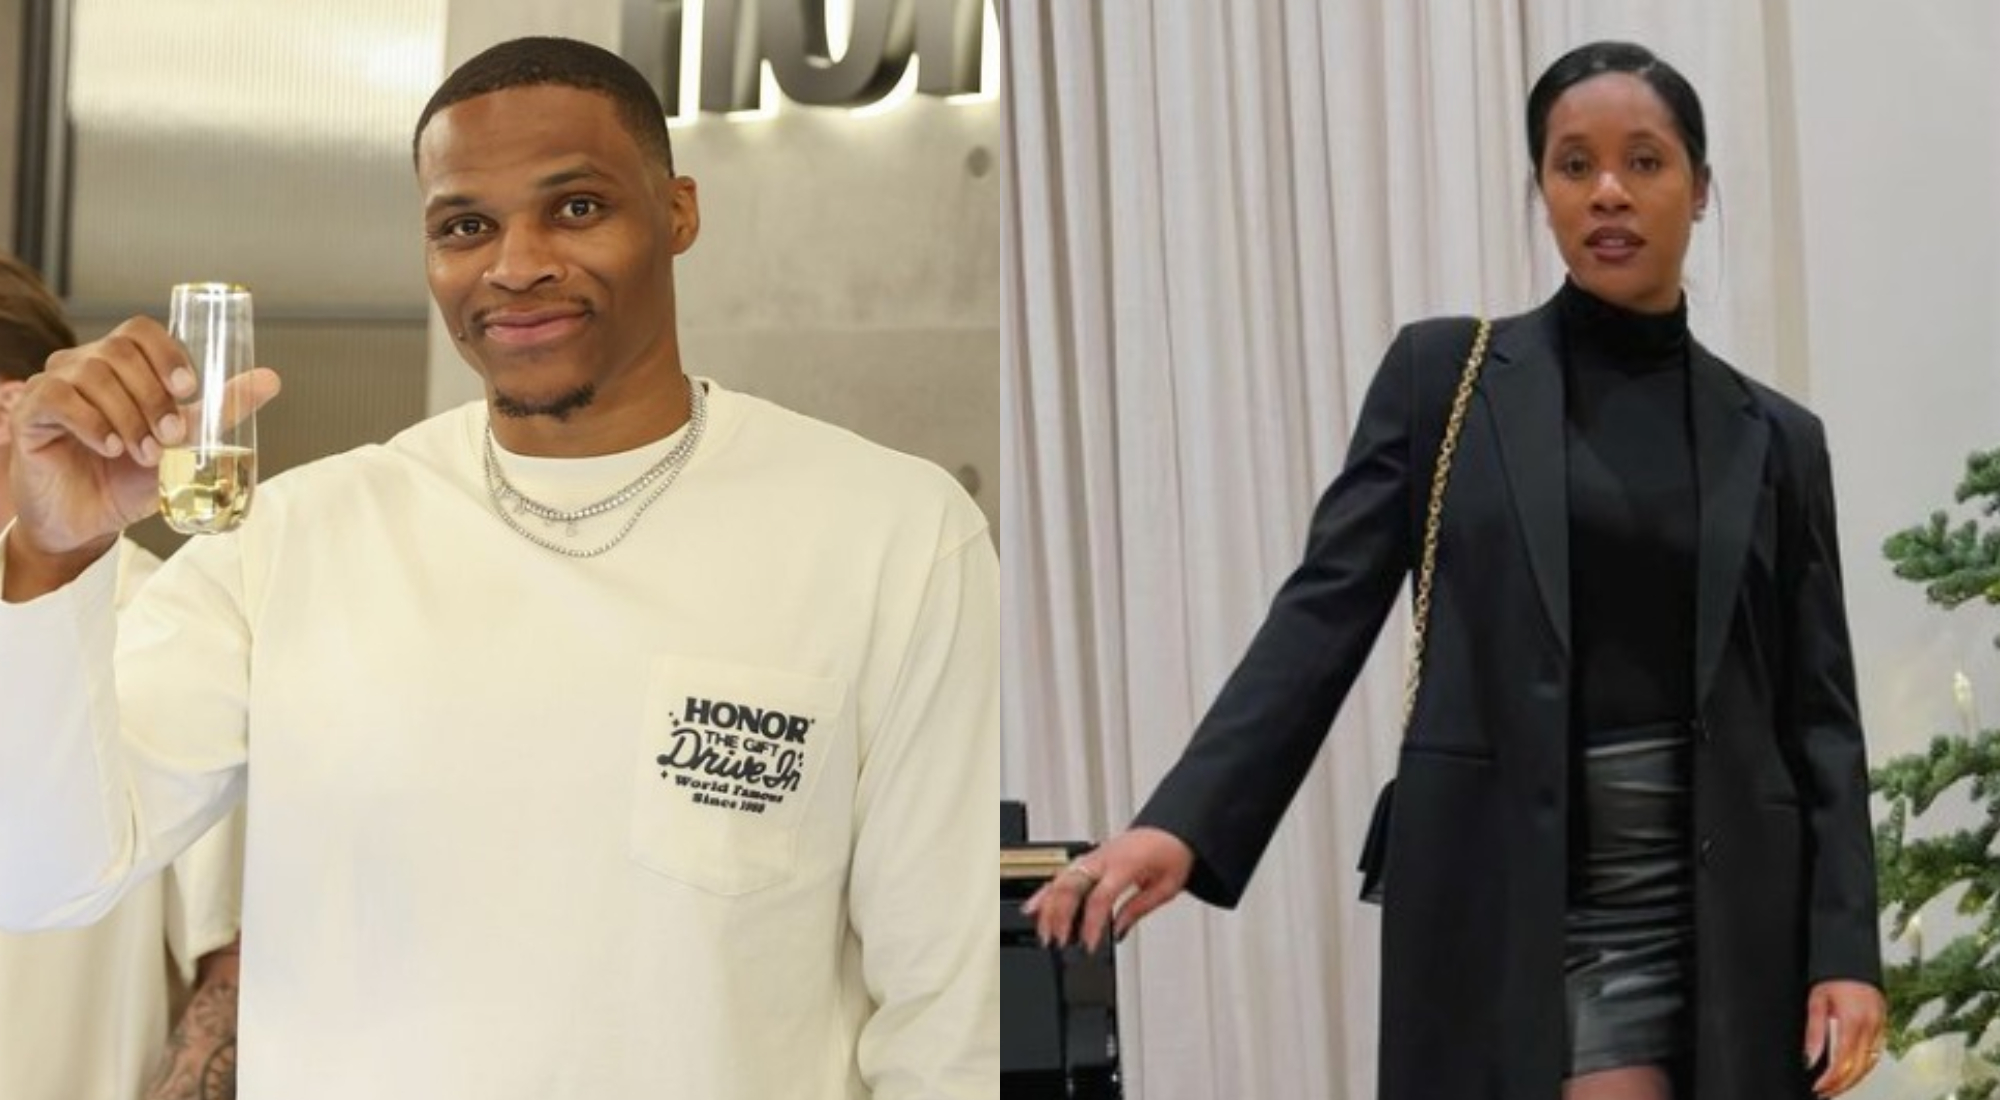 Style Goals! Russell and Nina Westbrook Make Fashion Statement at HTG ...